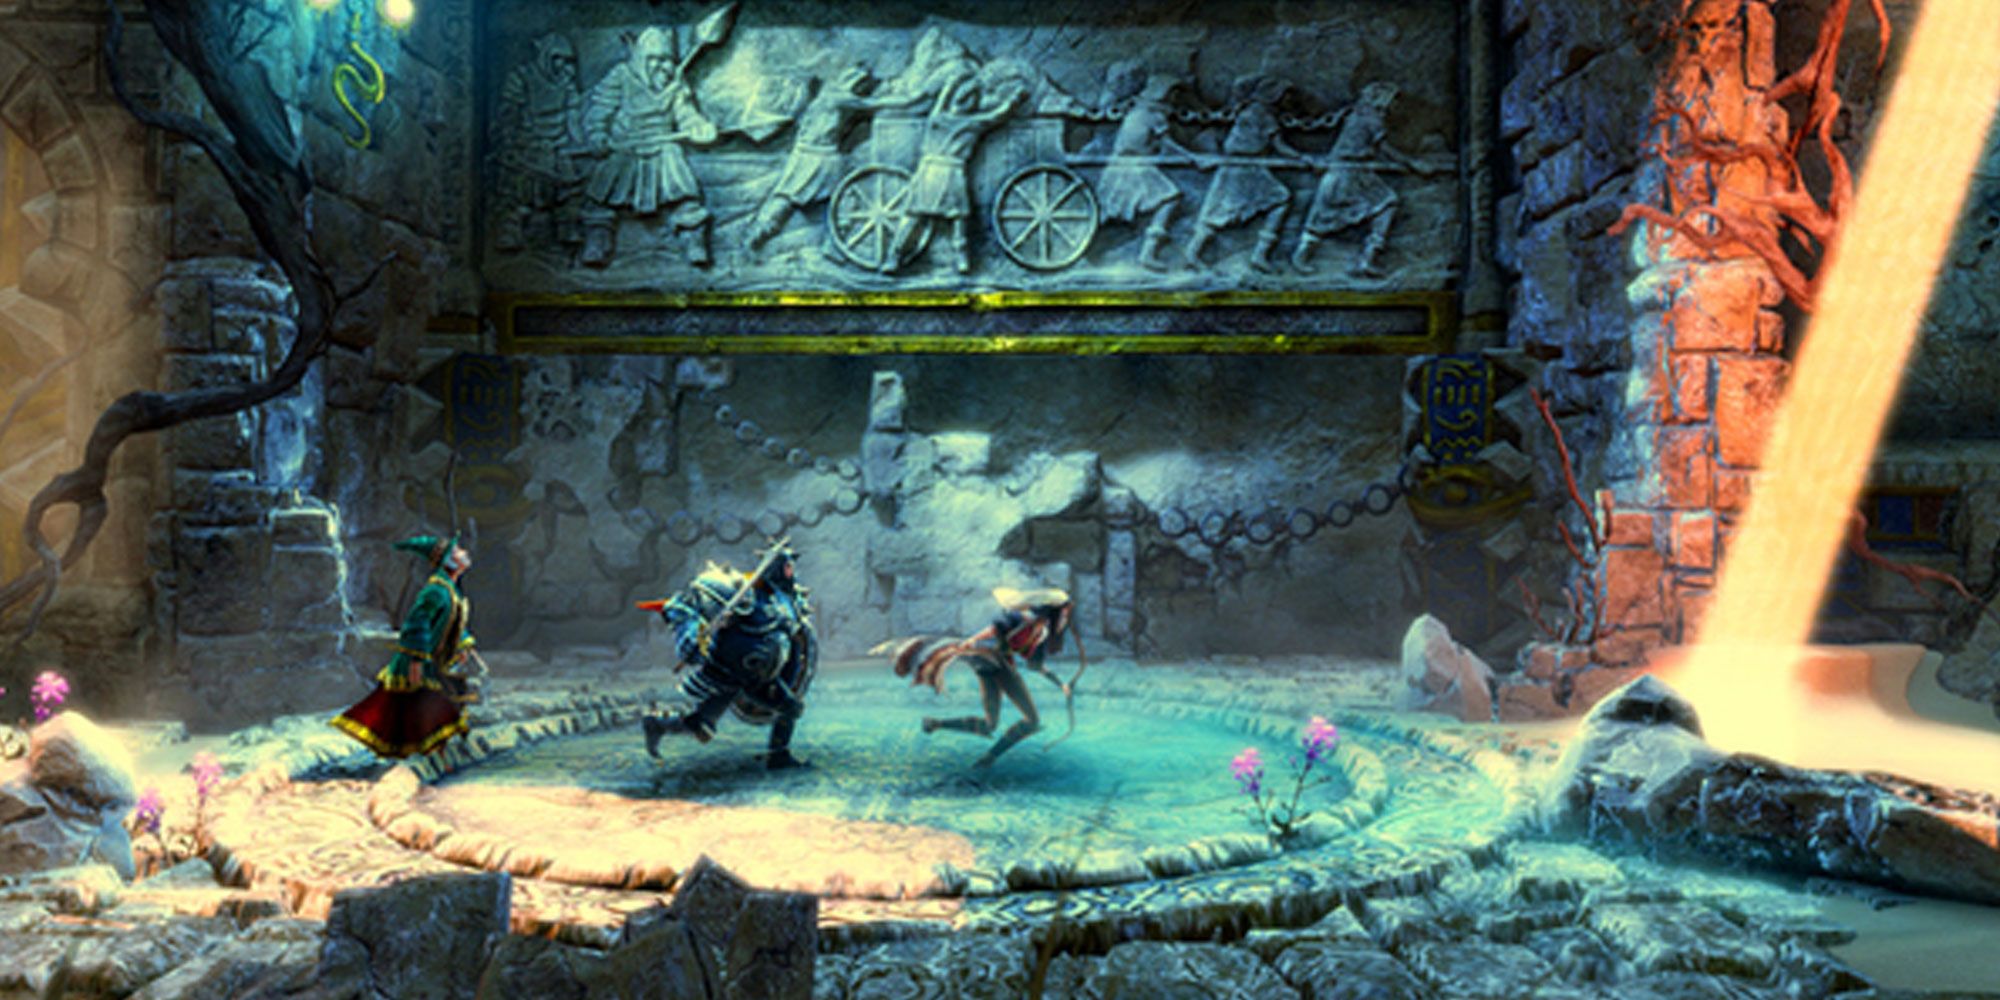 Three characters explore a temple level from the game Trine 